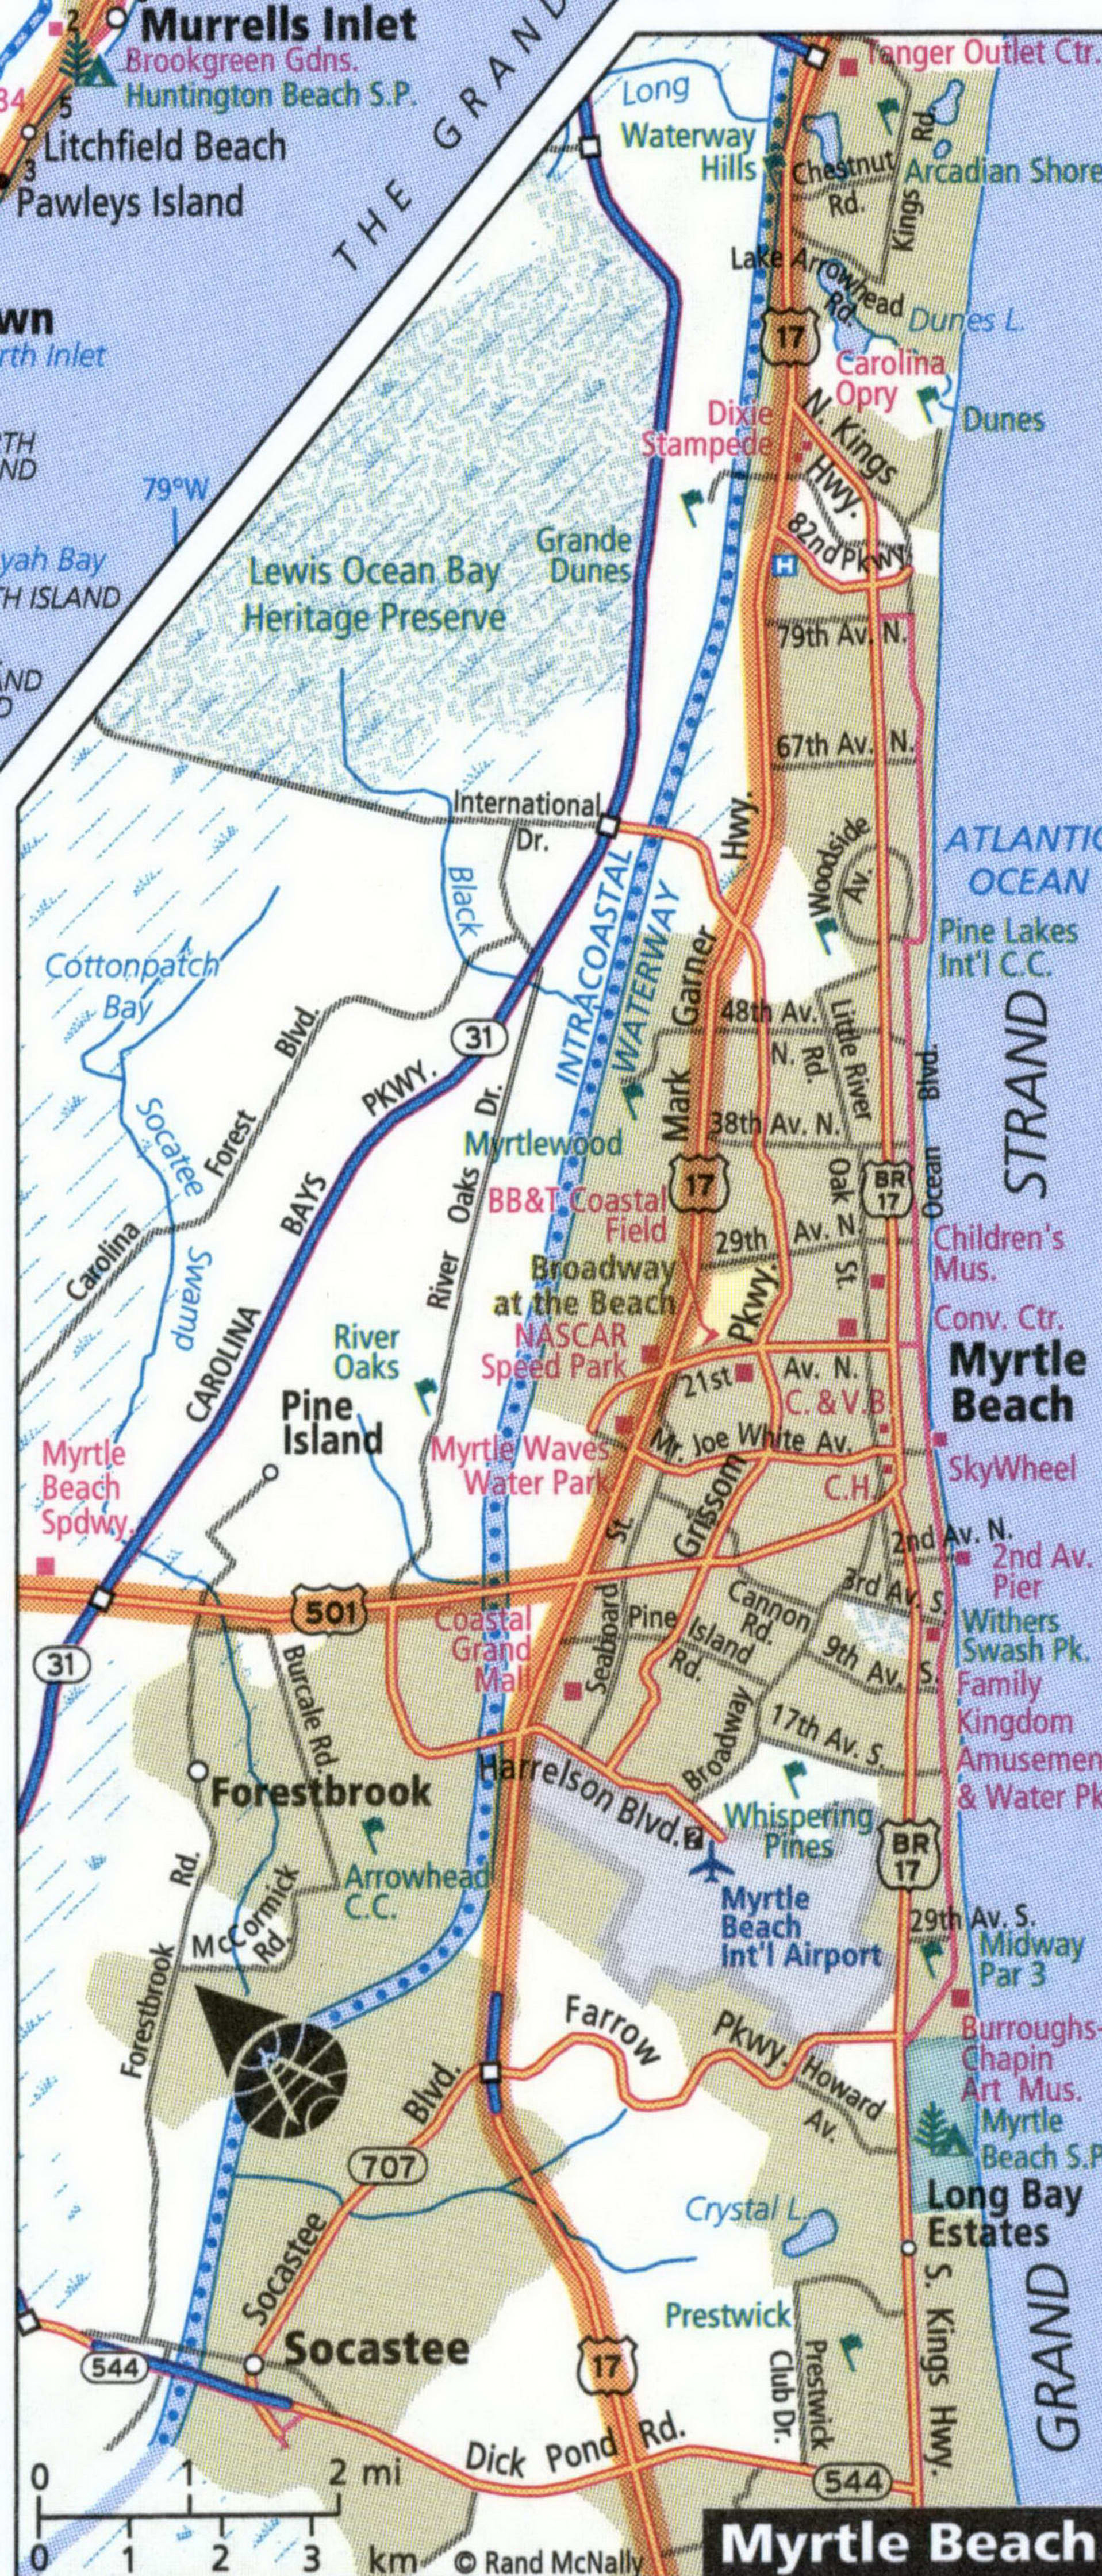 Myrtle Beach city map for truckers